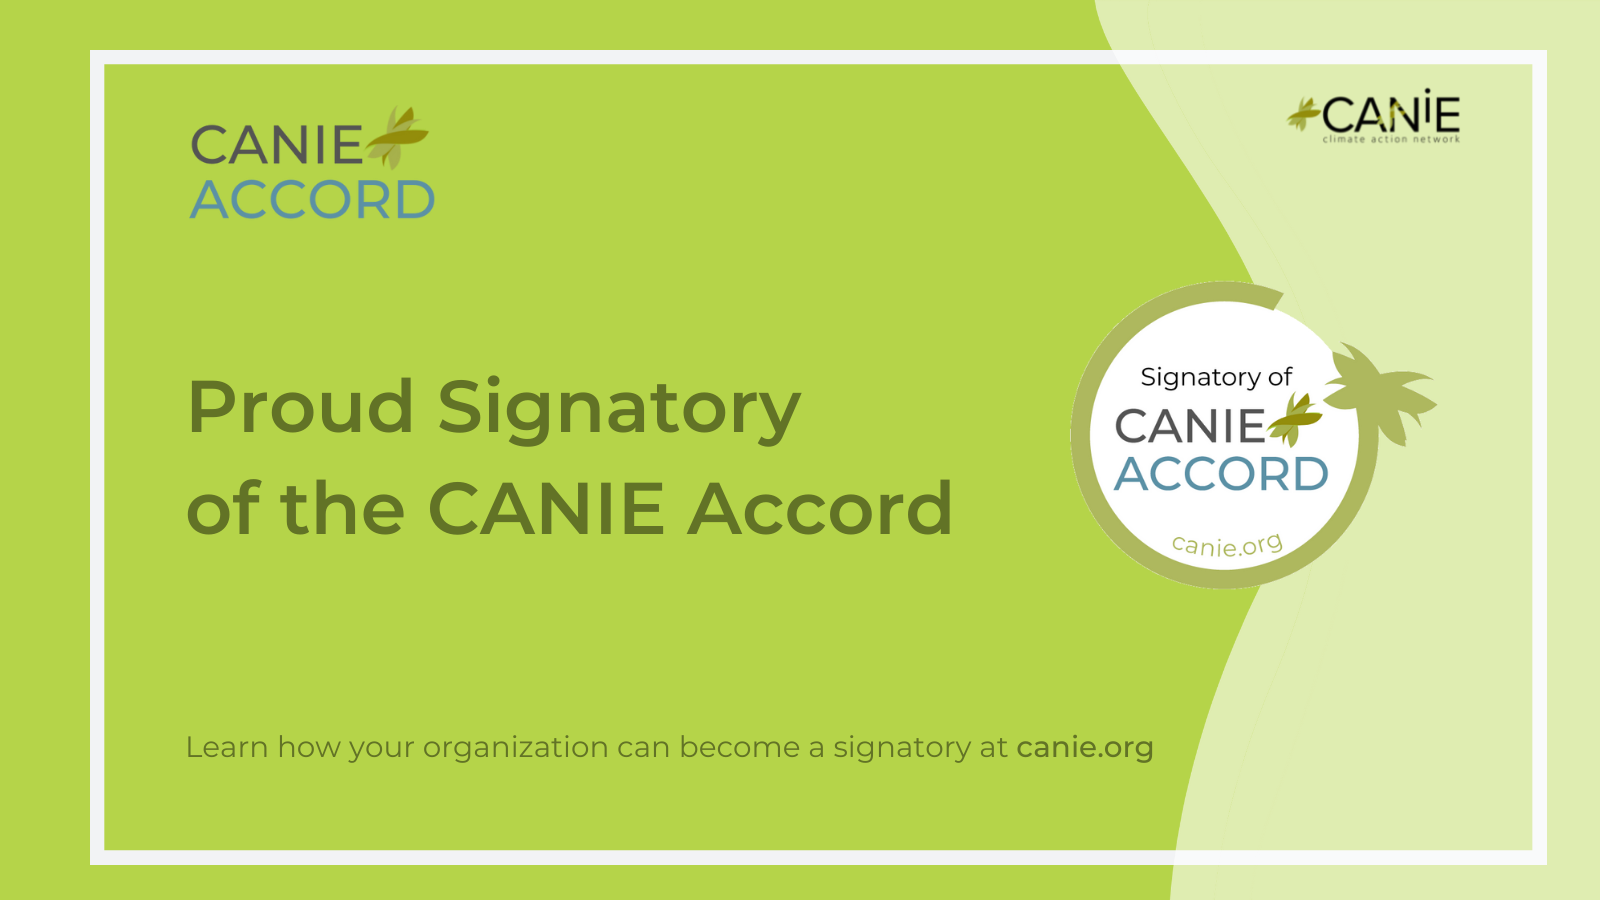 Proud Signatory of the CANIE Accord on green background with CANIE Accord logo